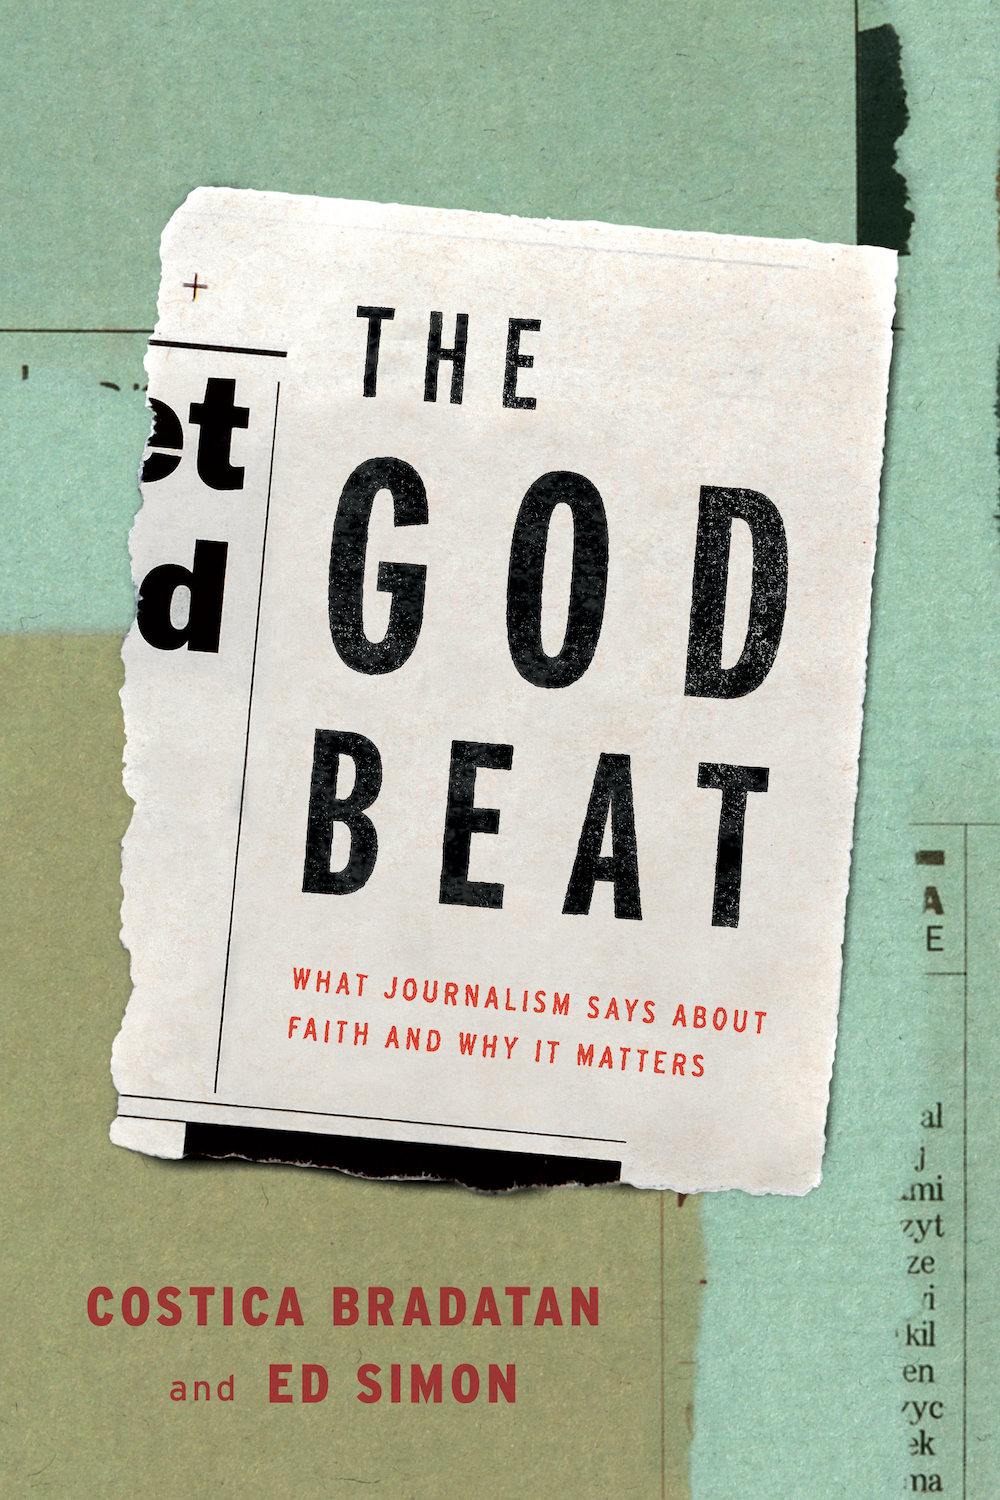 "The God Beat: What Journalism Says About Faith and Why It Matters" by Costica Braddatan and Ed Simon